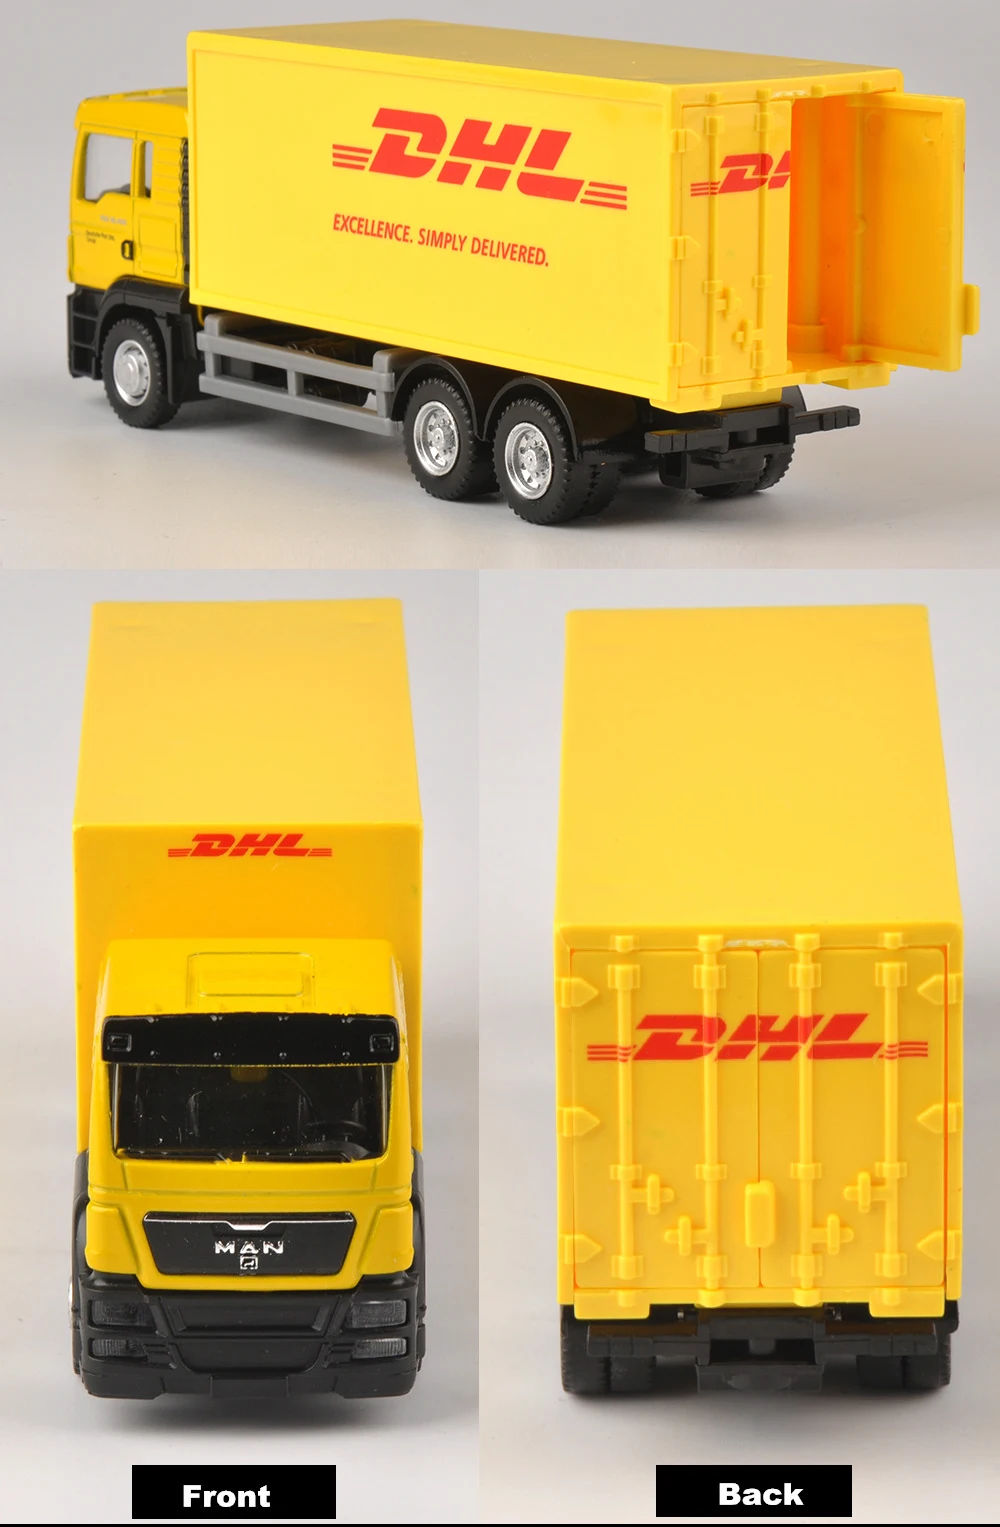 1:64 MAN TGS Express DHL Container Truck LKW Modellauto Spielzeug Model Gelb